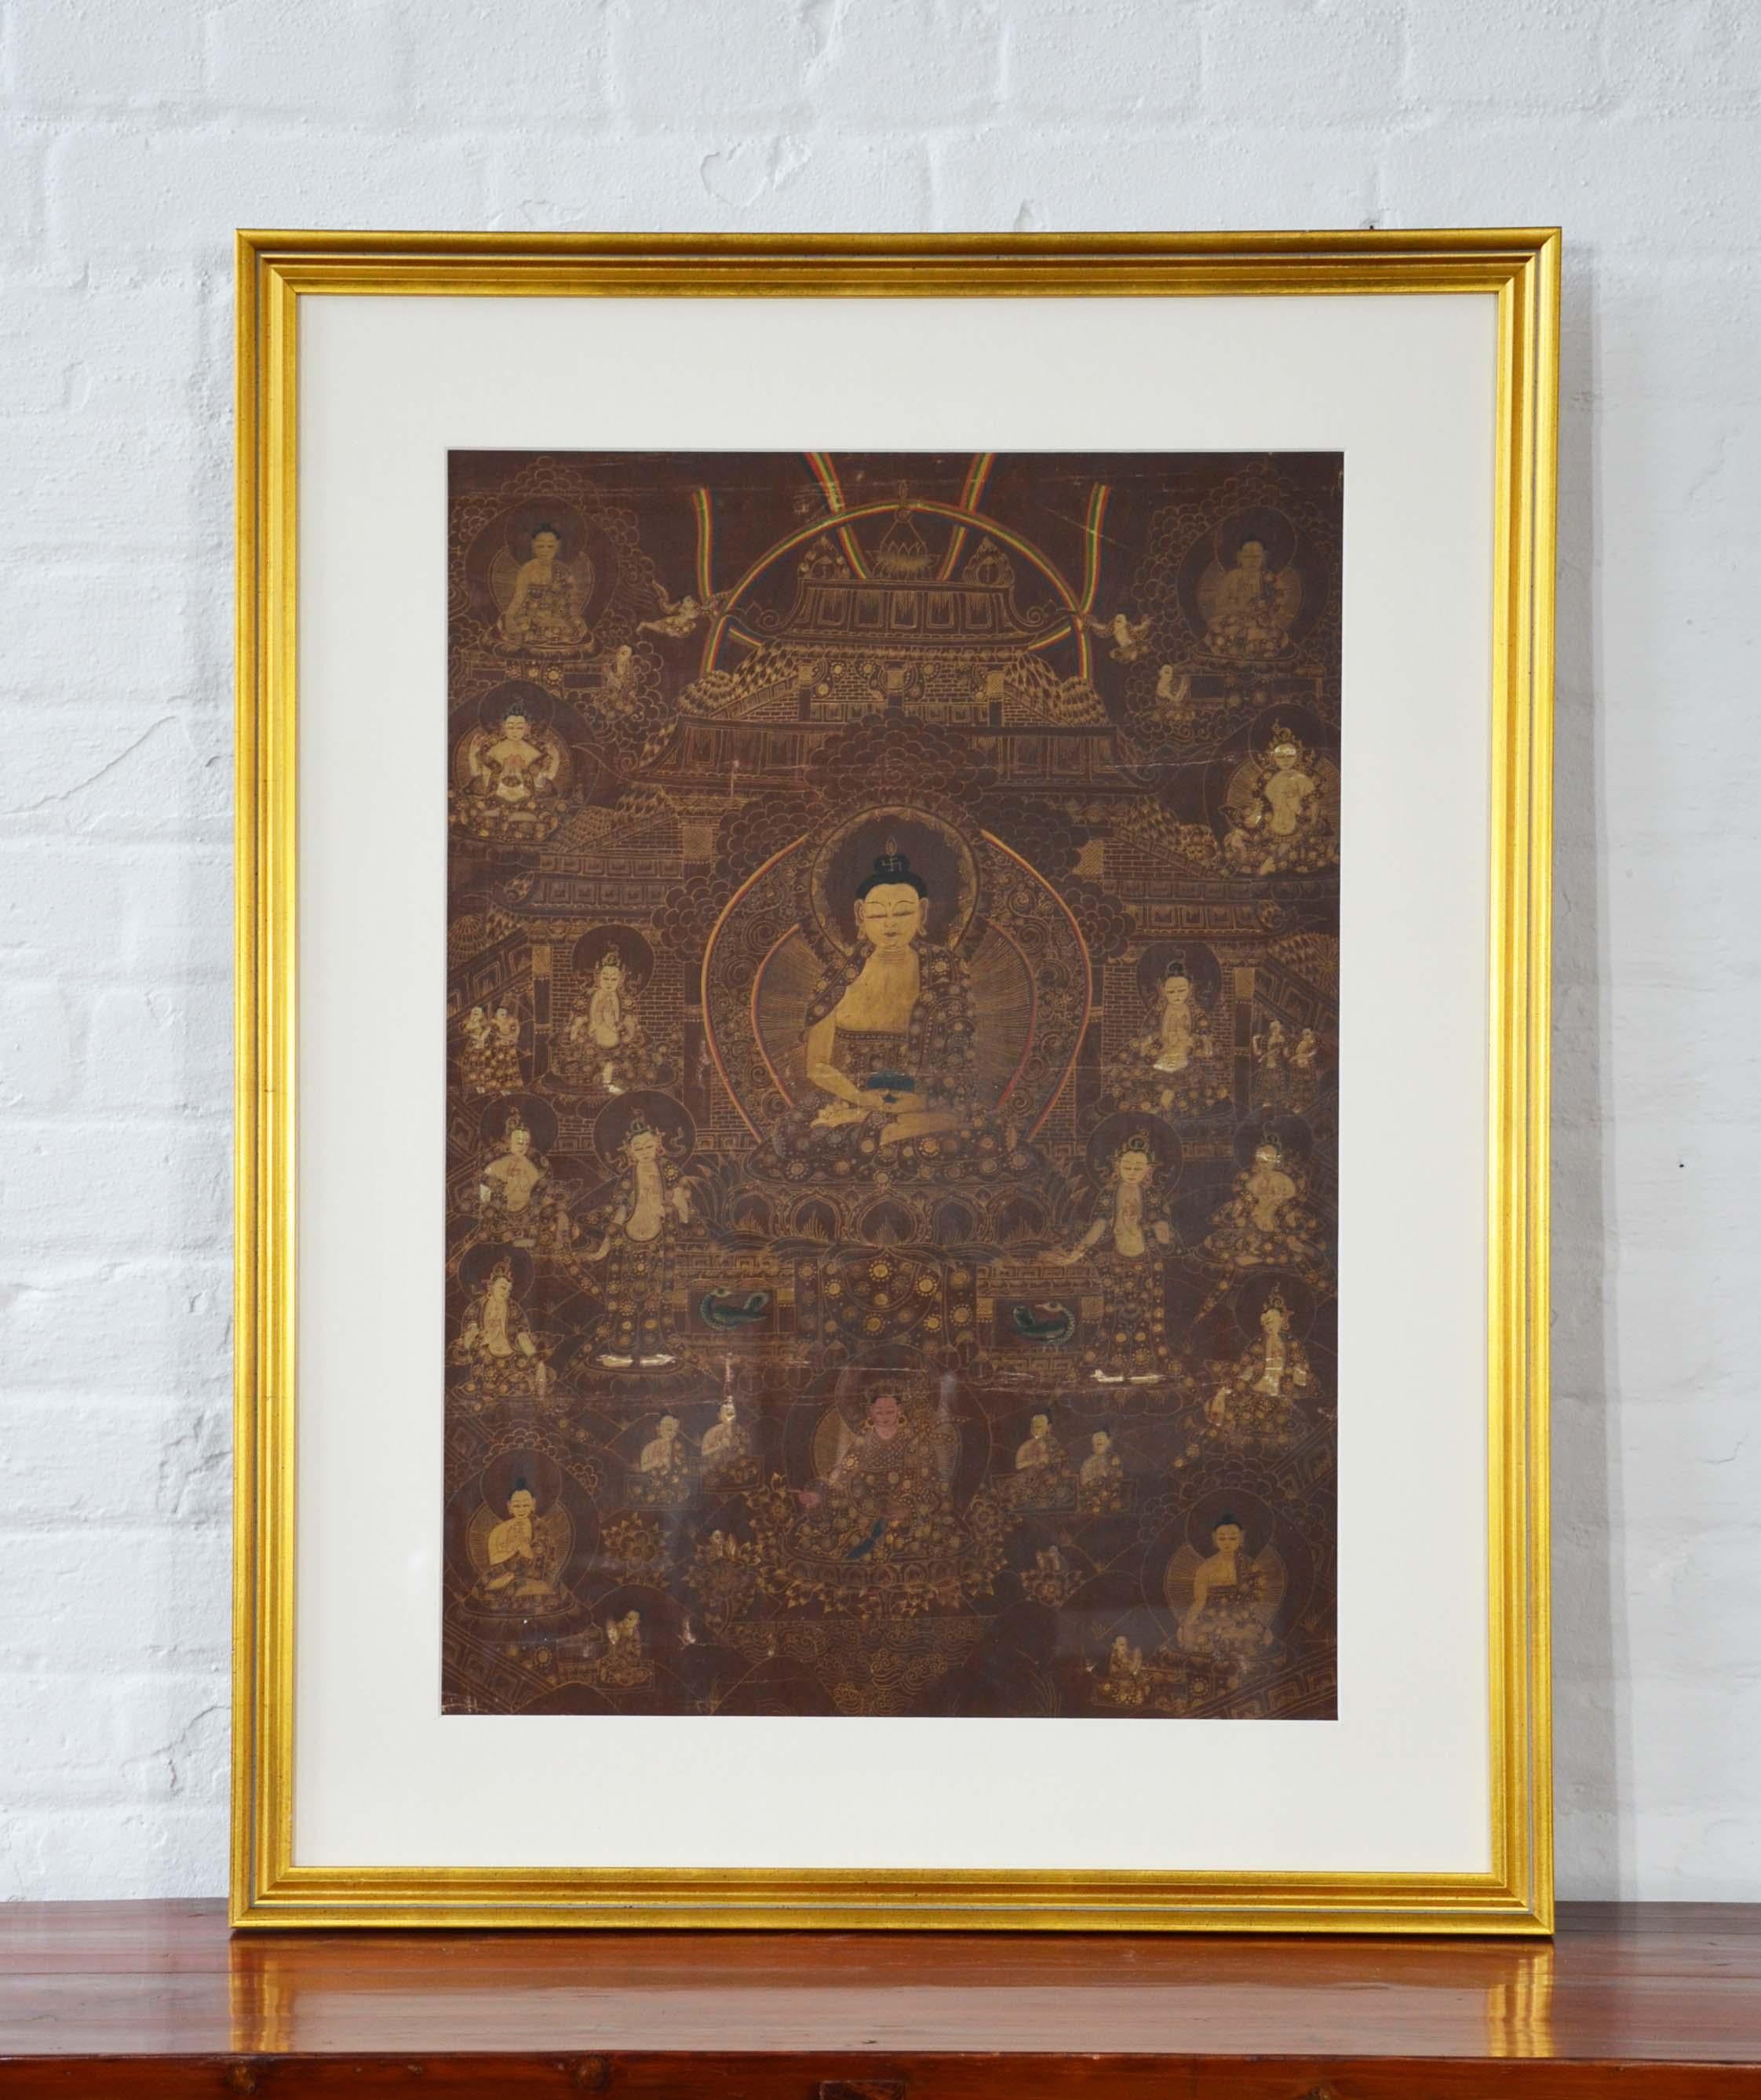 tibetan buddhist monks created rolled-up cloth paintings called thangkas as